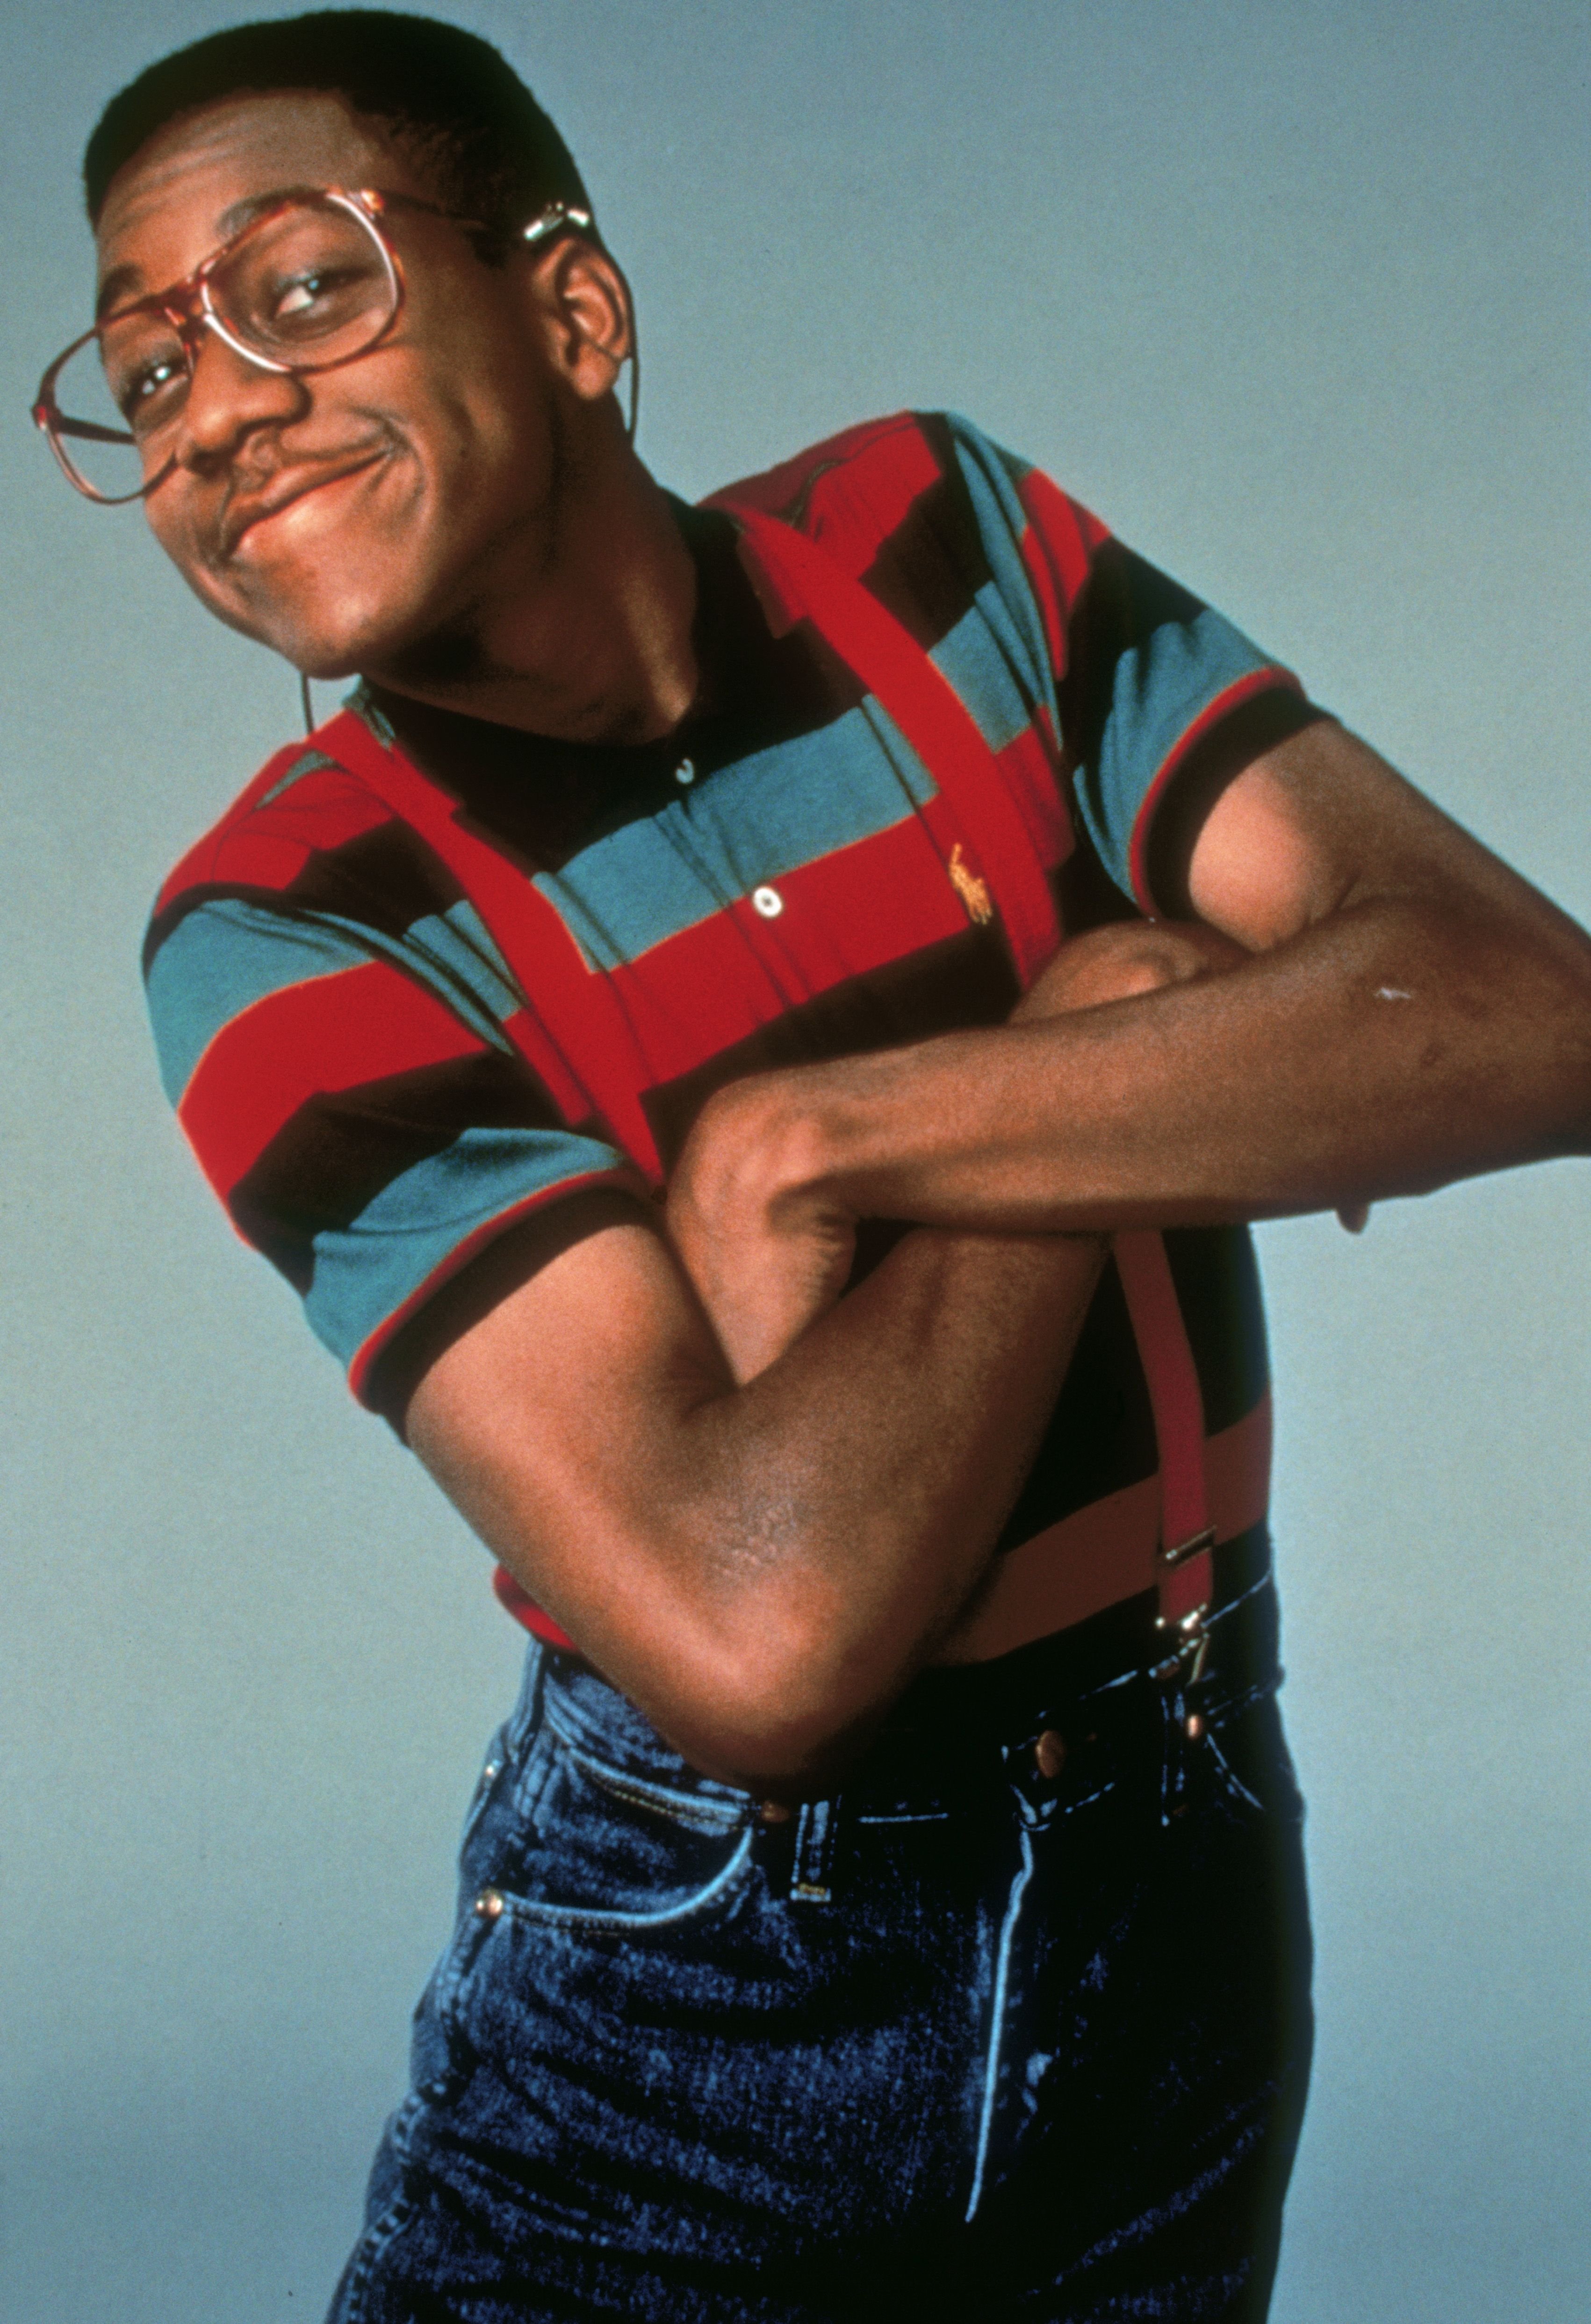 Jaleel White smiles for a poster as Steve Urkel in the television series "Family Matters," circa 1990. 